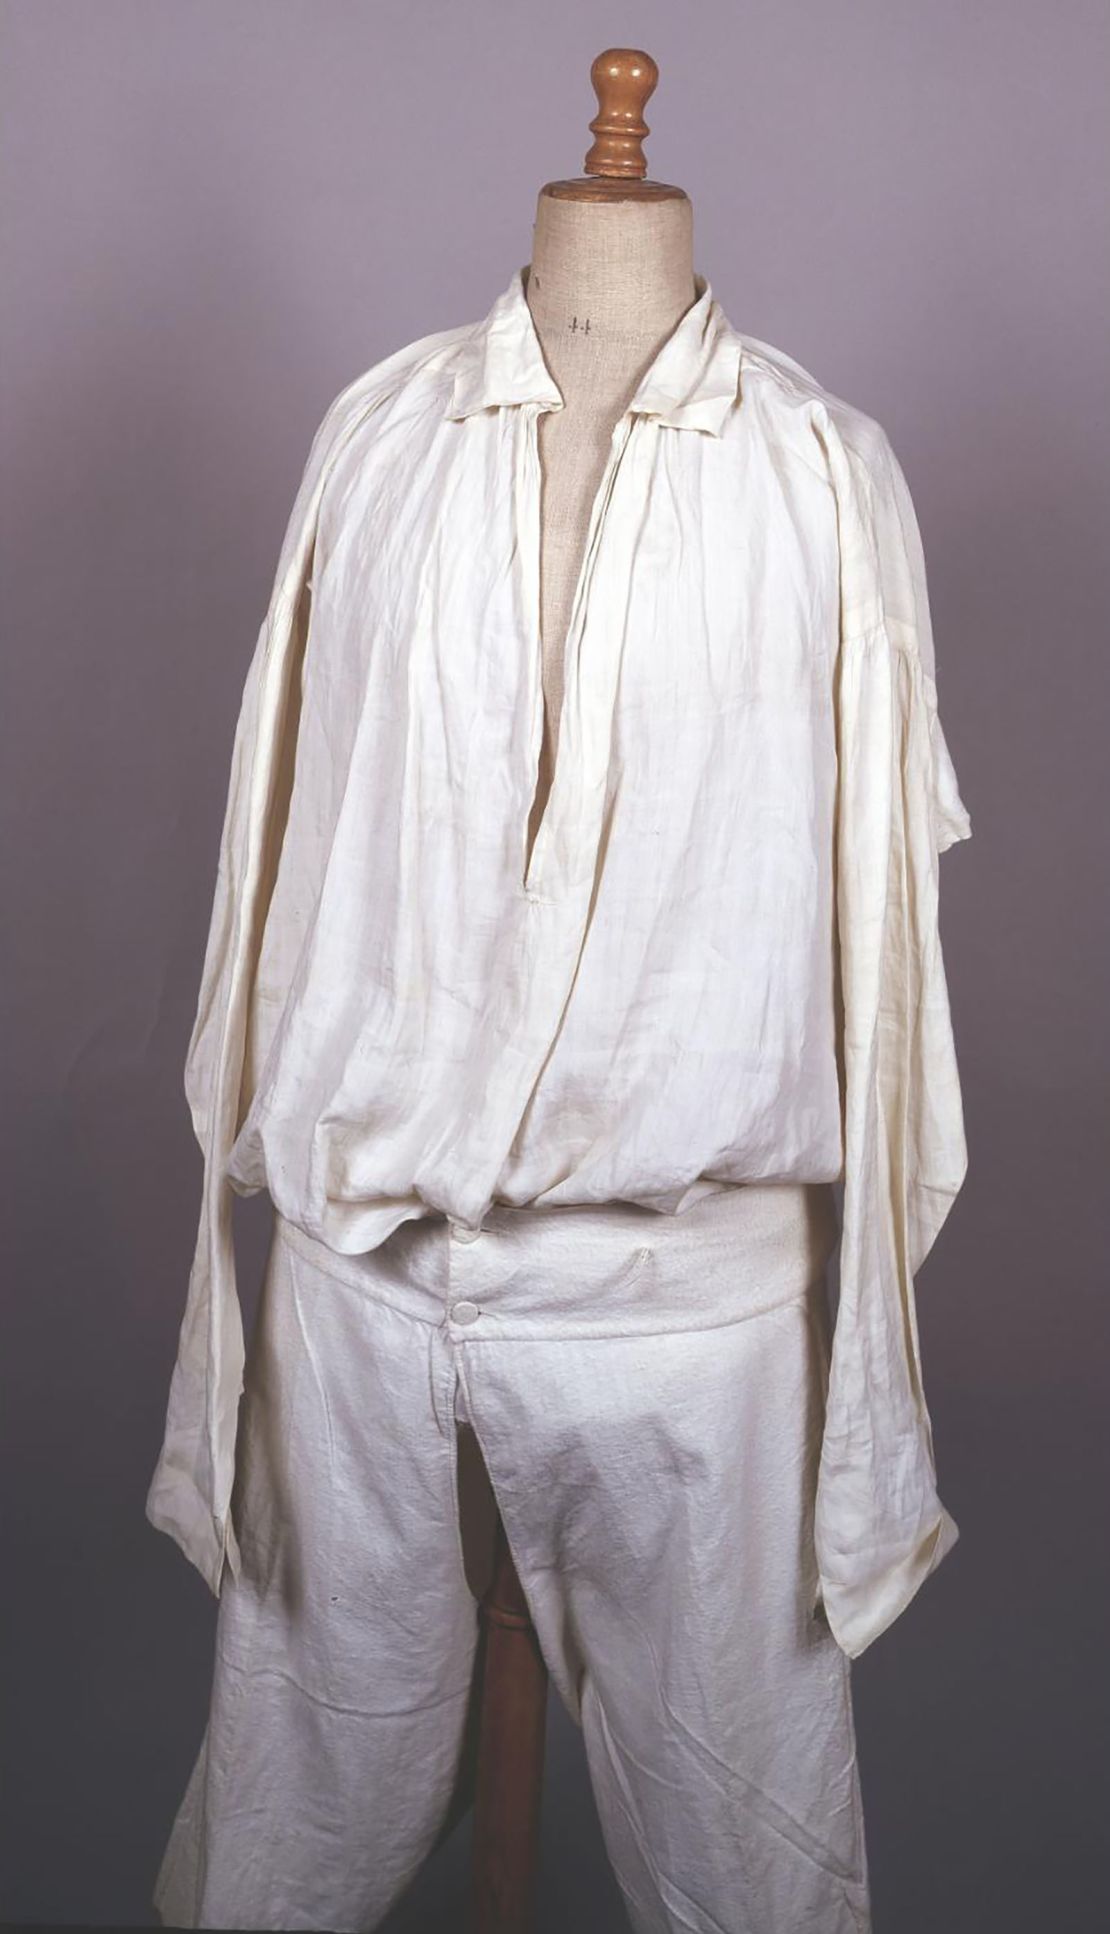 Shirt and long johns worn by Emperor Napoleon I on St. Helena island. The shirt is stained with blood. Napoleon wore it at the very end of his life. Both pieces are embroidered with the imperial initials.